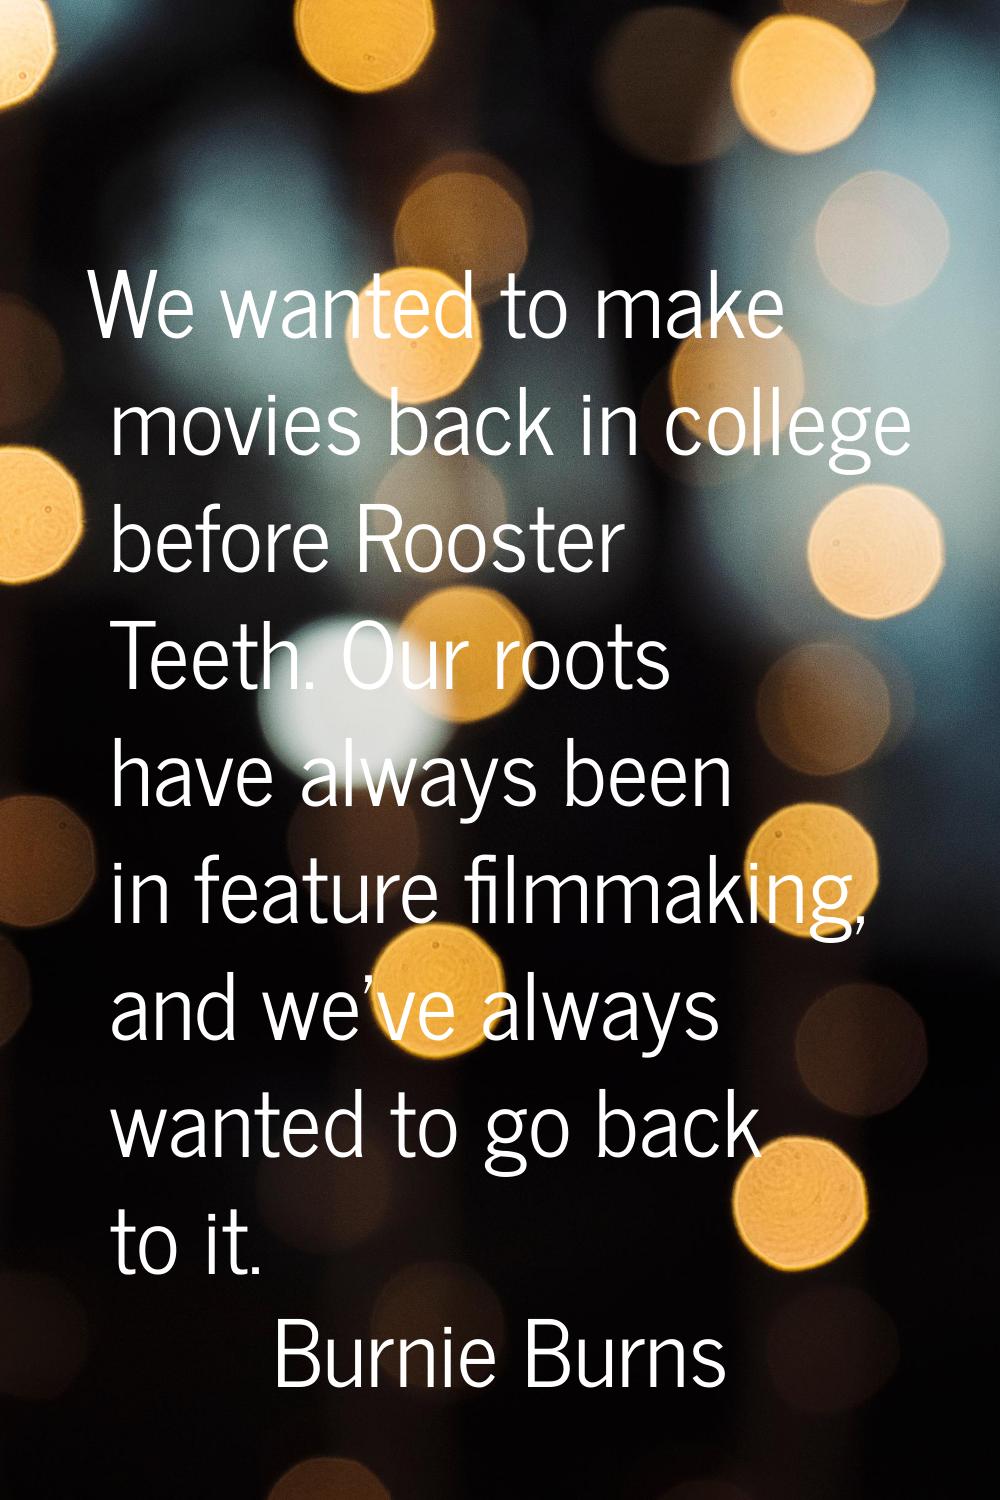 We wanted to make movies back in college before Rooster Teeth. Our roots have always been in featur